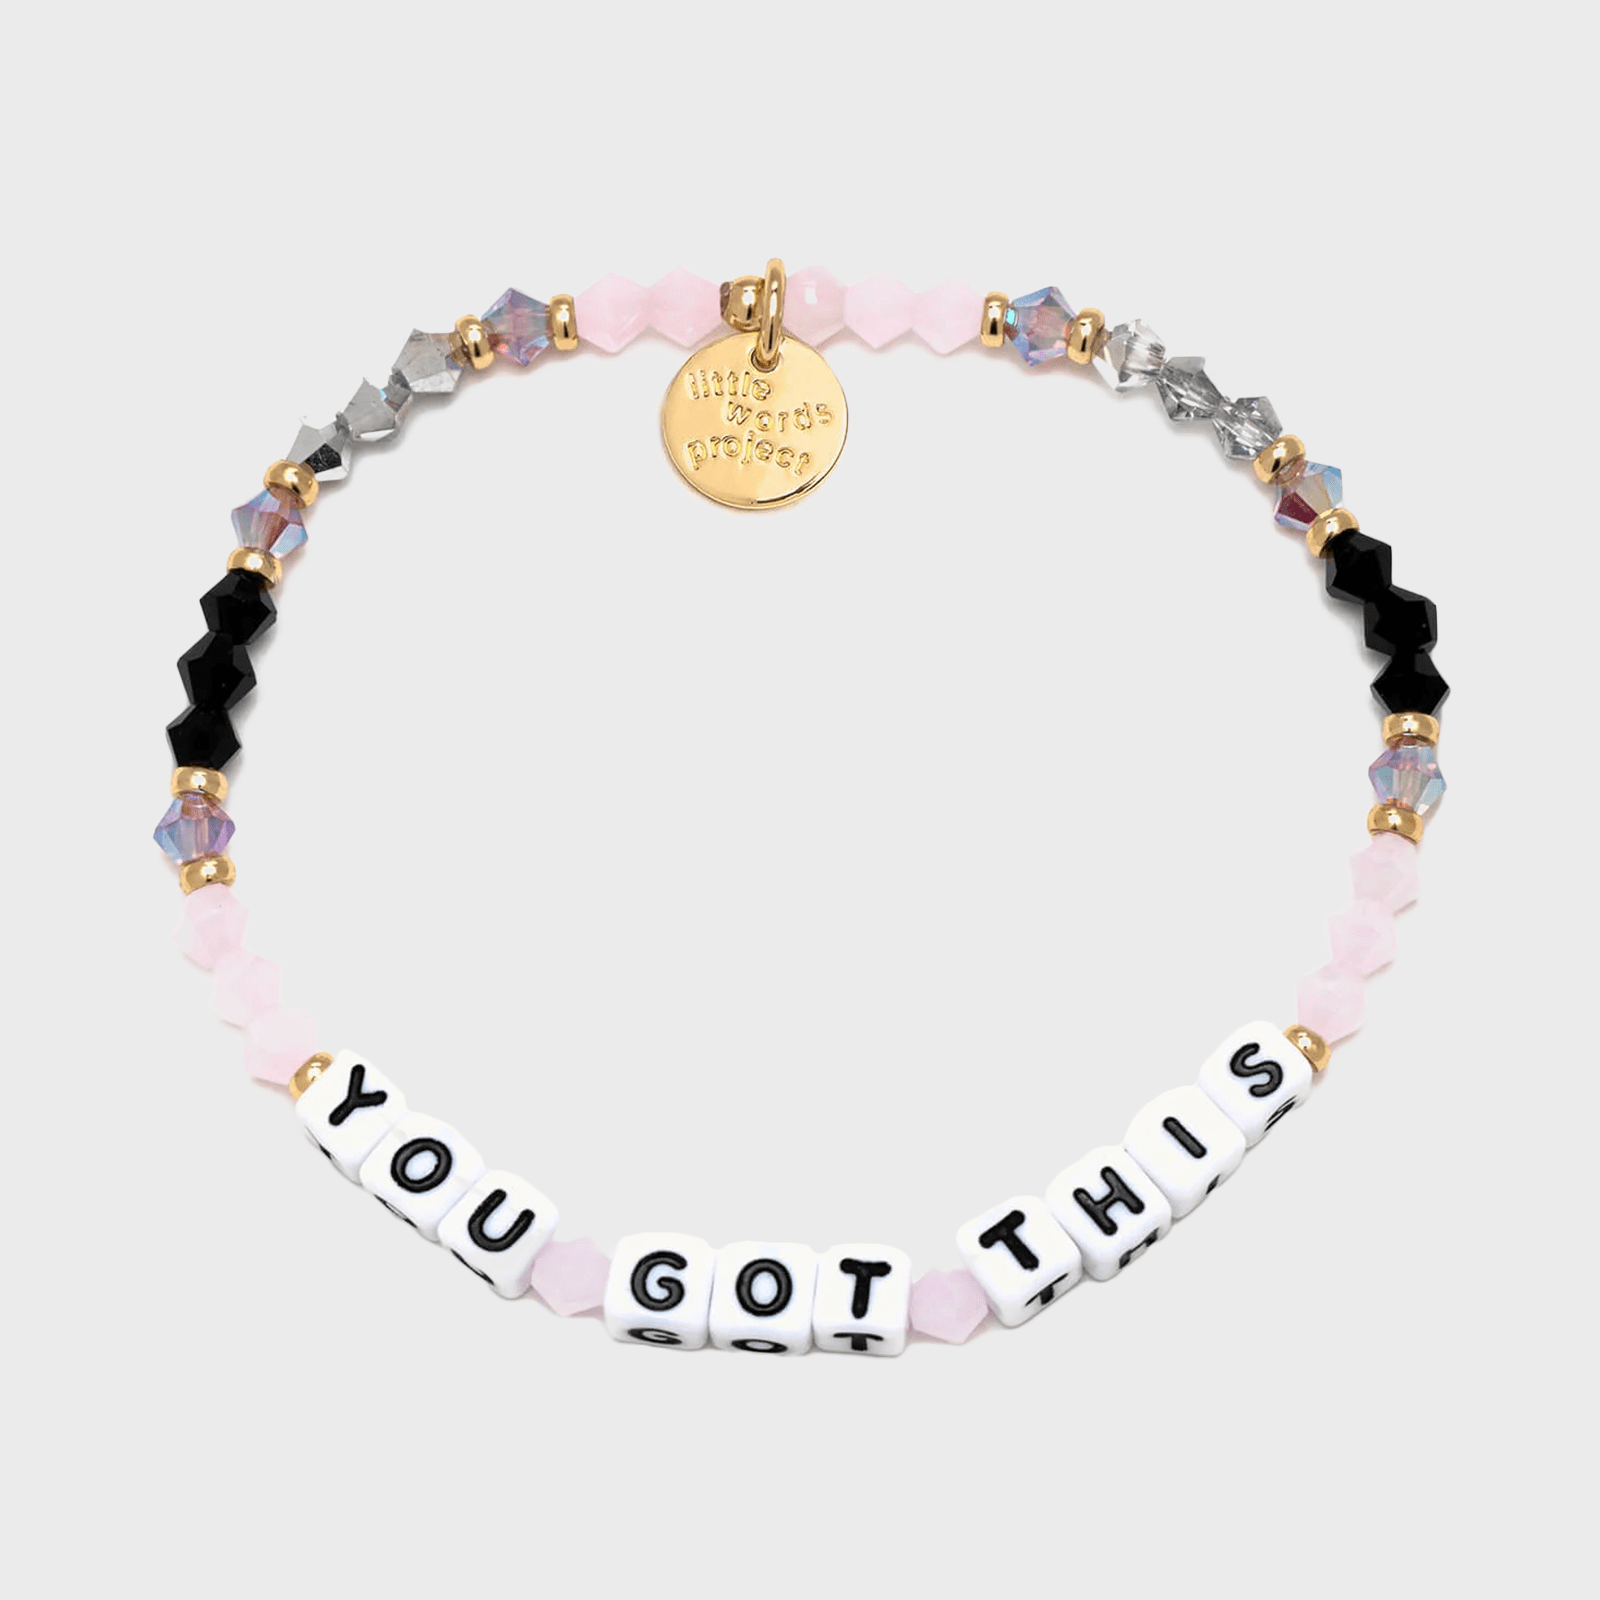 <p>Give her a gift for girls that reminds her every day just how awesome she really is. This set <a href="https://littlewordsproject.com/products/you-got-this-bravery" rel="noopener noreferrer">stack bracelets</a> will encourage her to be kind to herself and pass that kindness onto someone else. With three special messages in each set ("Know Your Worth," "GRL PWR," and "You Can"), these bracelets encourage spreading love. She can keep one for herself, give the other two to her BFFs and start building her own empowered girl squad.</p> <p class="listicle-page__cta-button-shop"><a class="shop-btn" href="https://littlewordsproject.com/products/you-got-this-bravery">Shop Now</a></p>